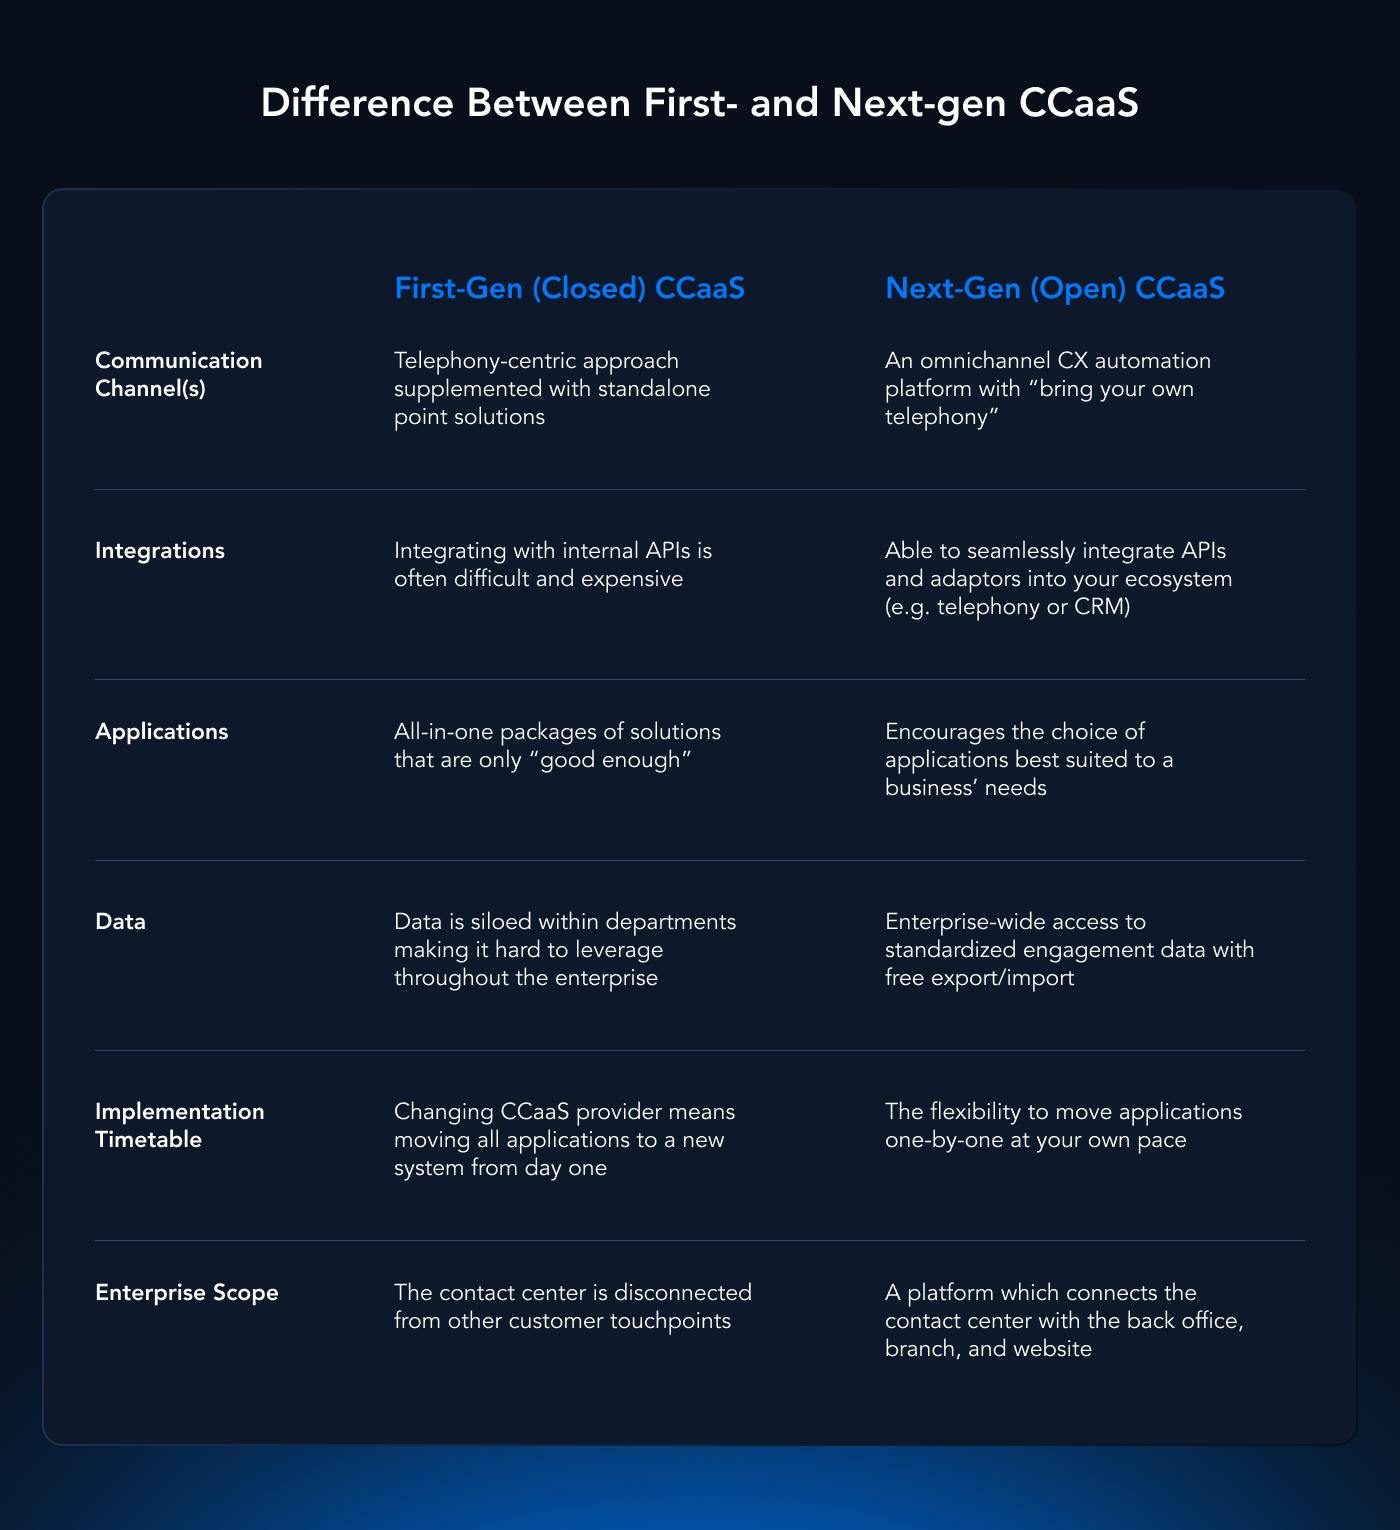 CCaaS first generation and CCaaS next generation difference